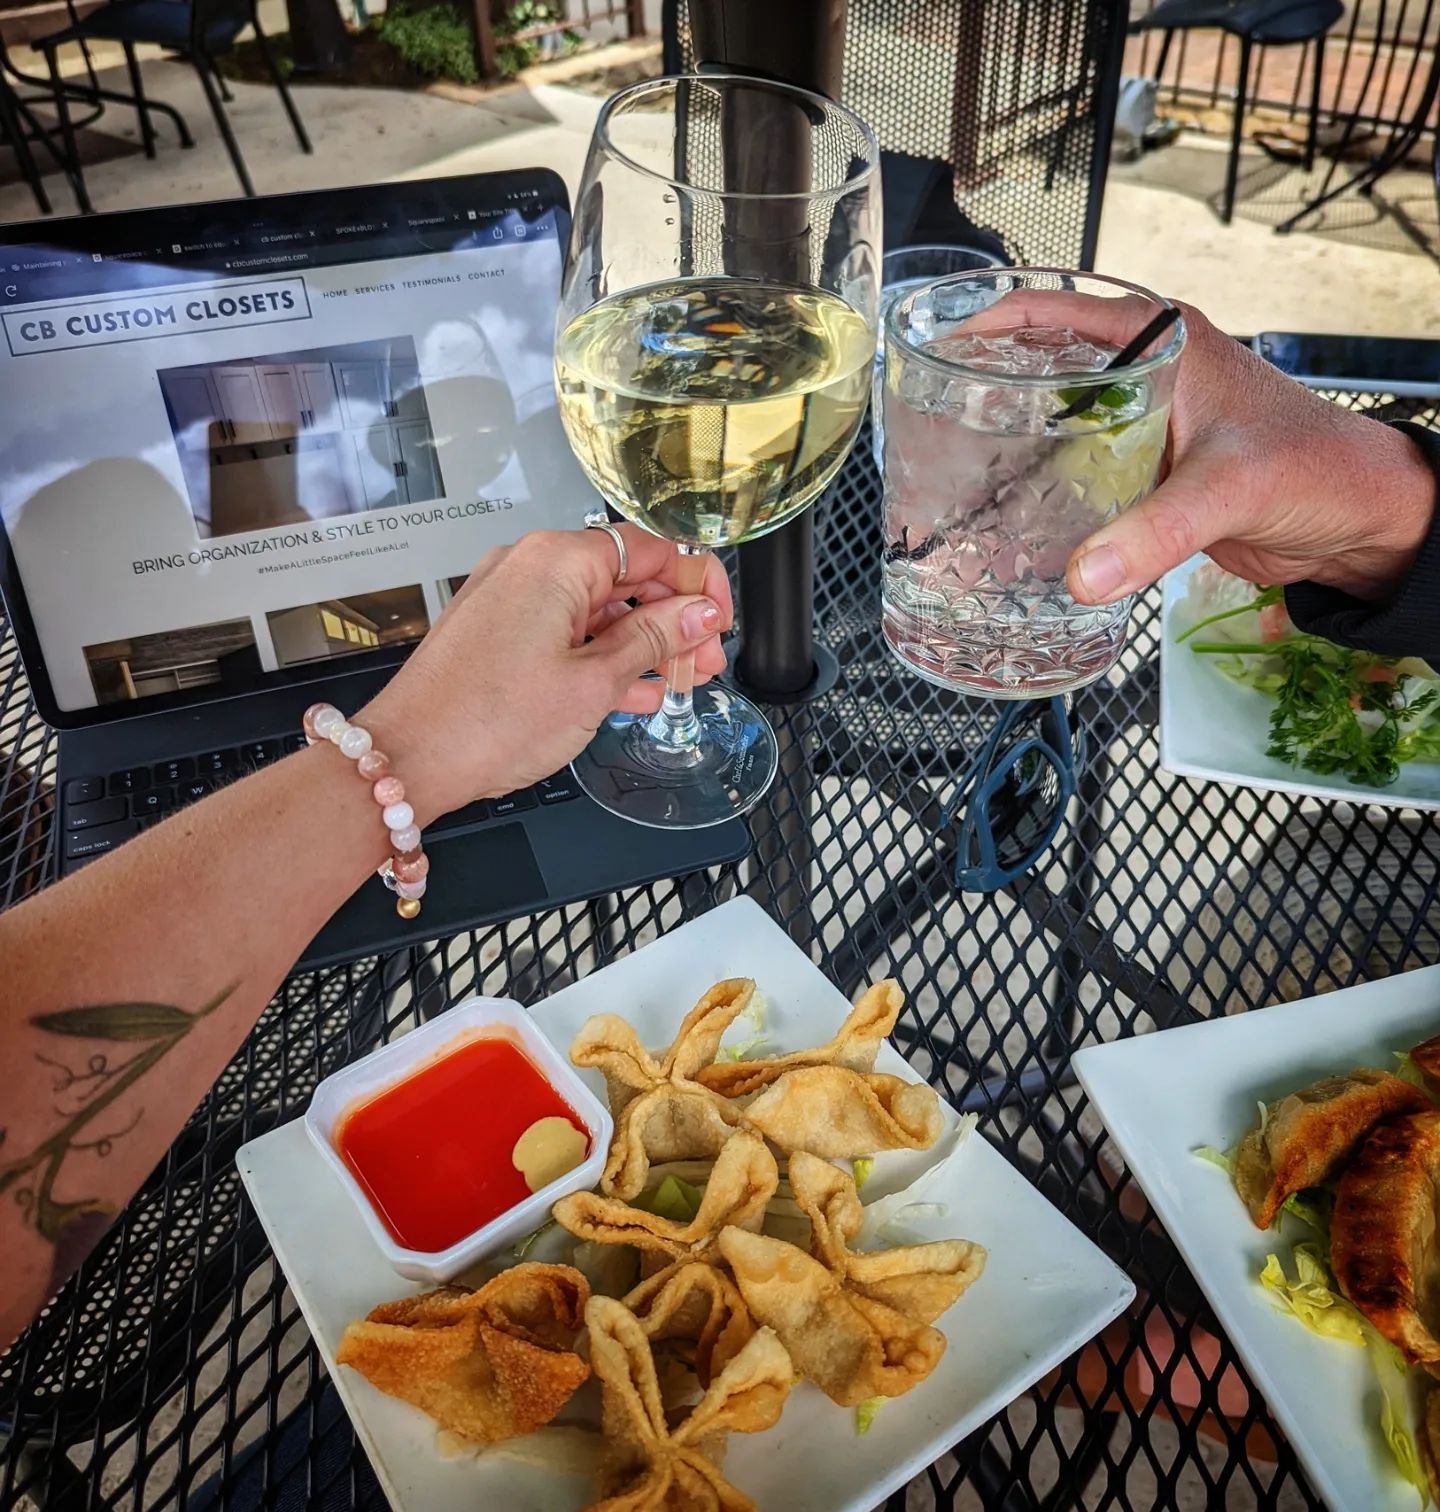 So ready for more website update lunch date vibes 🥂🌞🌷🍽️

I know the elves are hard at work to get our favorite keeeebler pass opened up for our local Western Slope small businesses and travelers.

Check out @cbcustomclosets based out of Crested B